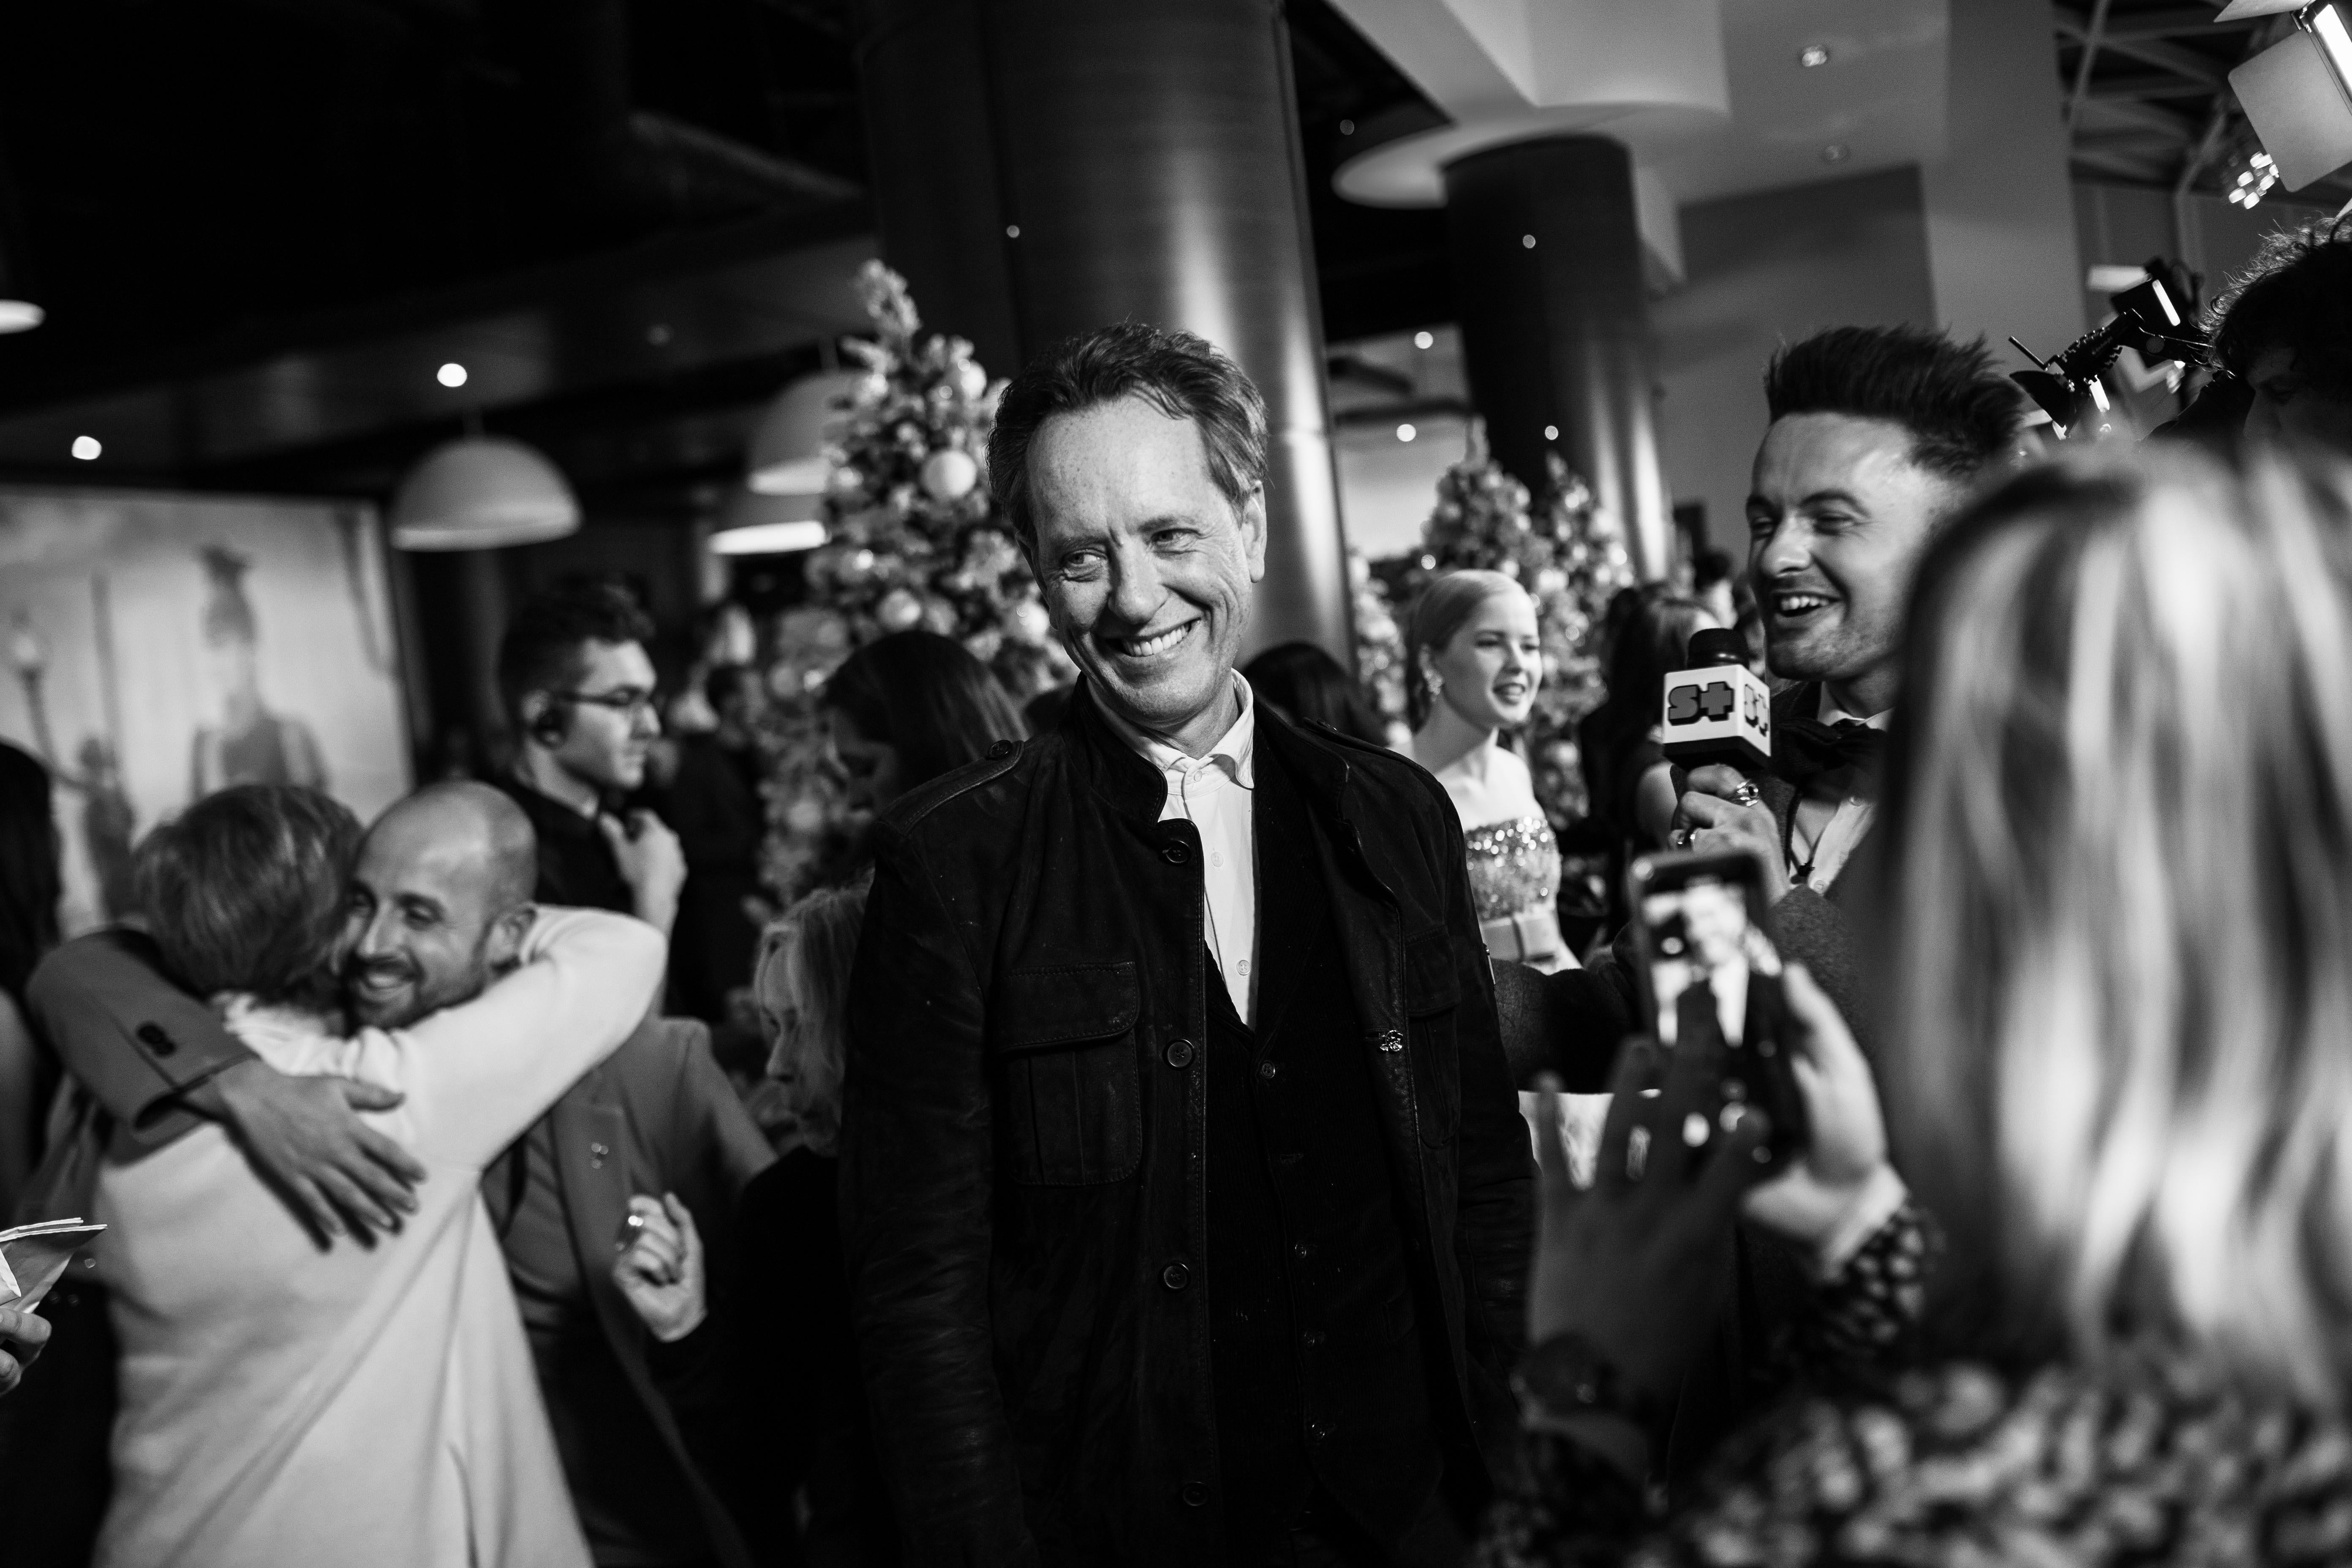 A black-and-white photo of Richard E. Grant smiling, surrounded by other people on a crowded red carpet for a movie premiere in November 2018.